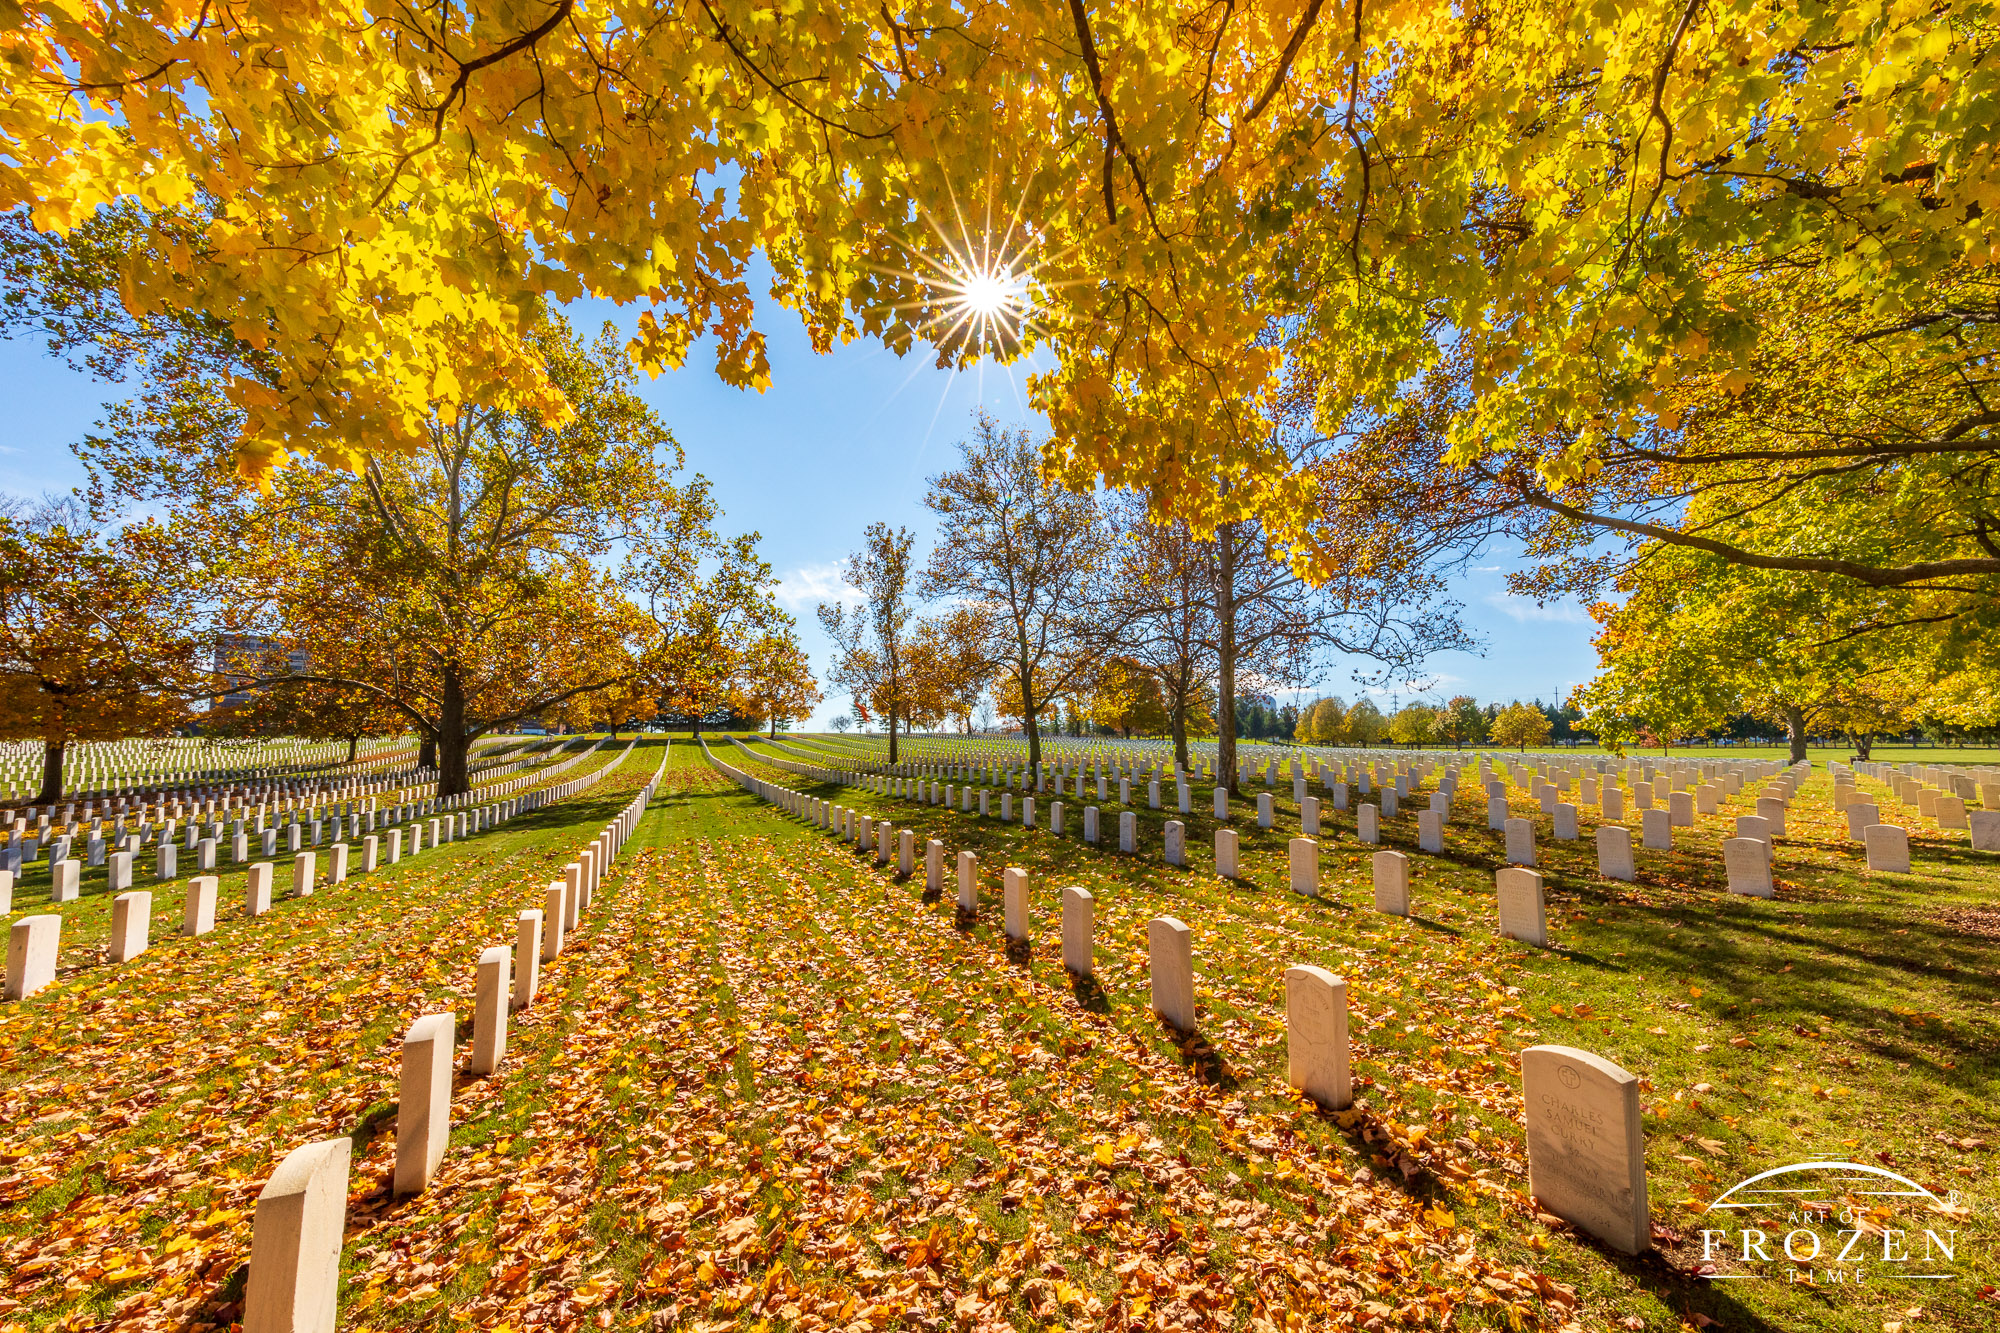 Panoramic image of Dayton National Cemetery on a colorful fall day where the backlit sun illuminated the golden leaves